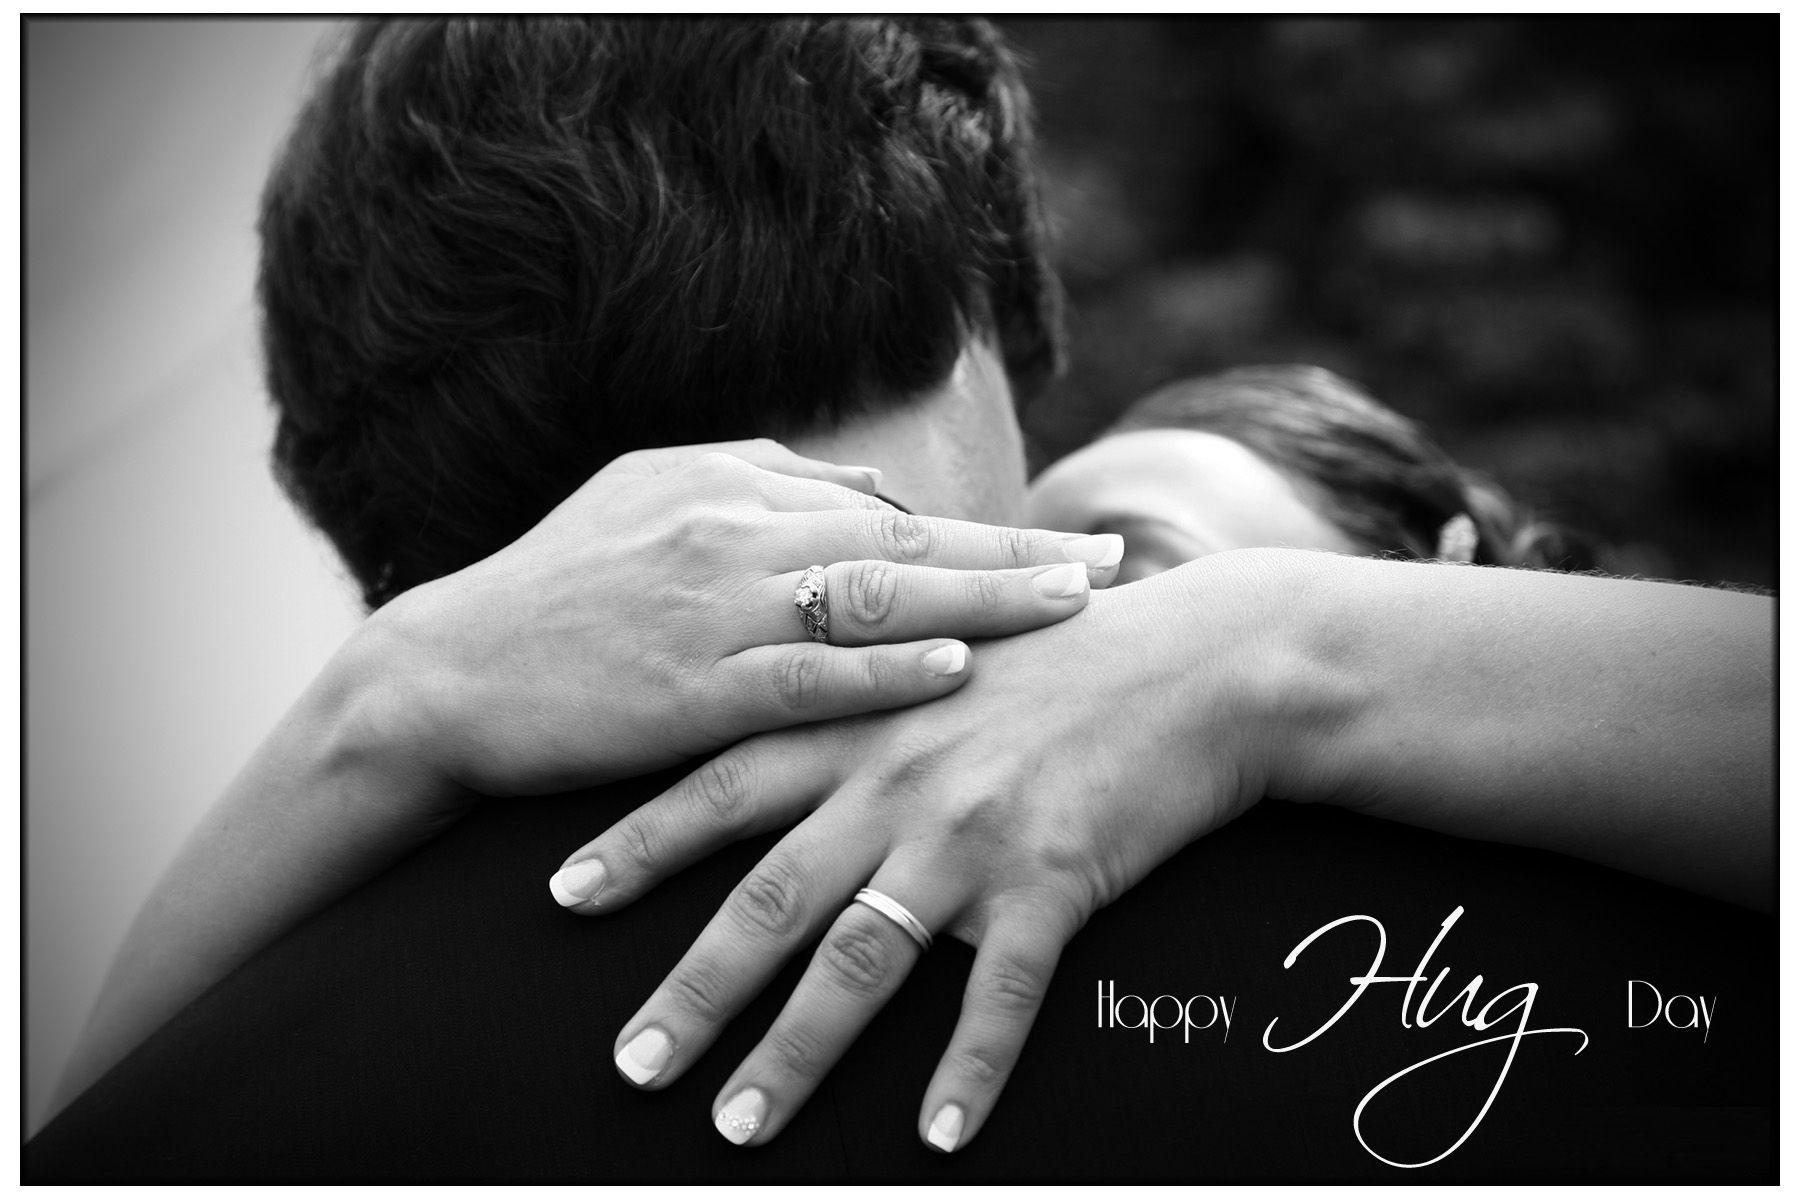 Happy Hug Day Wishes Love Romantic Couples Photo Graphic HD Wallpaper